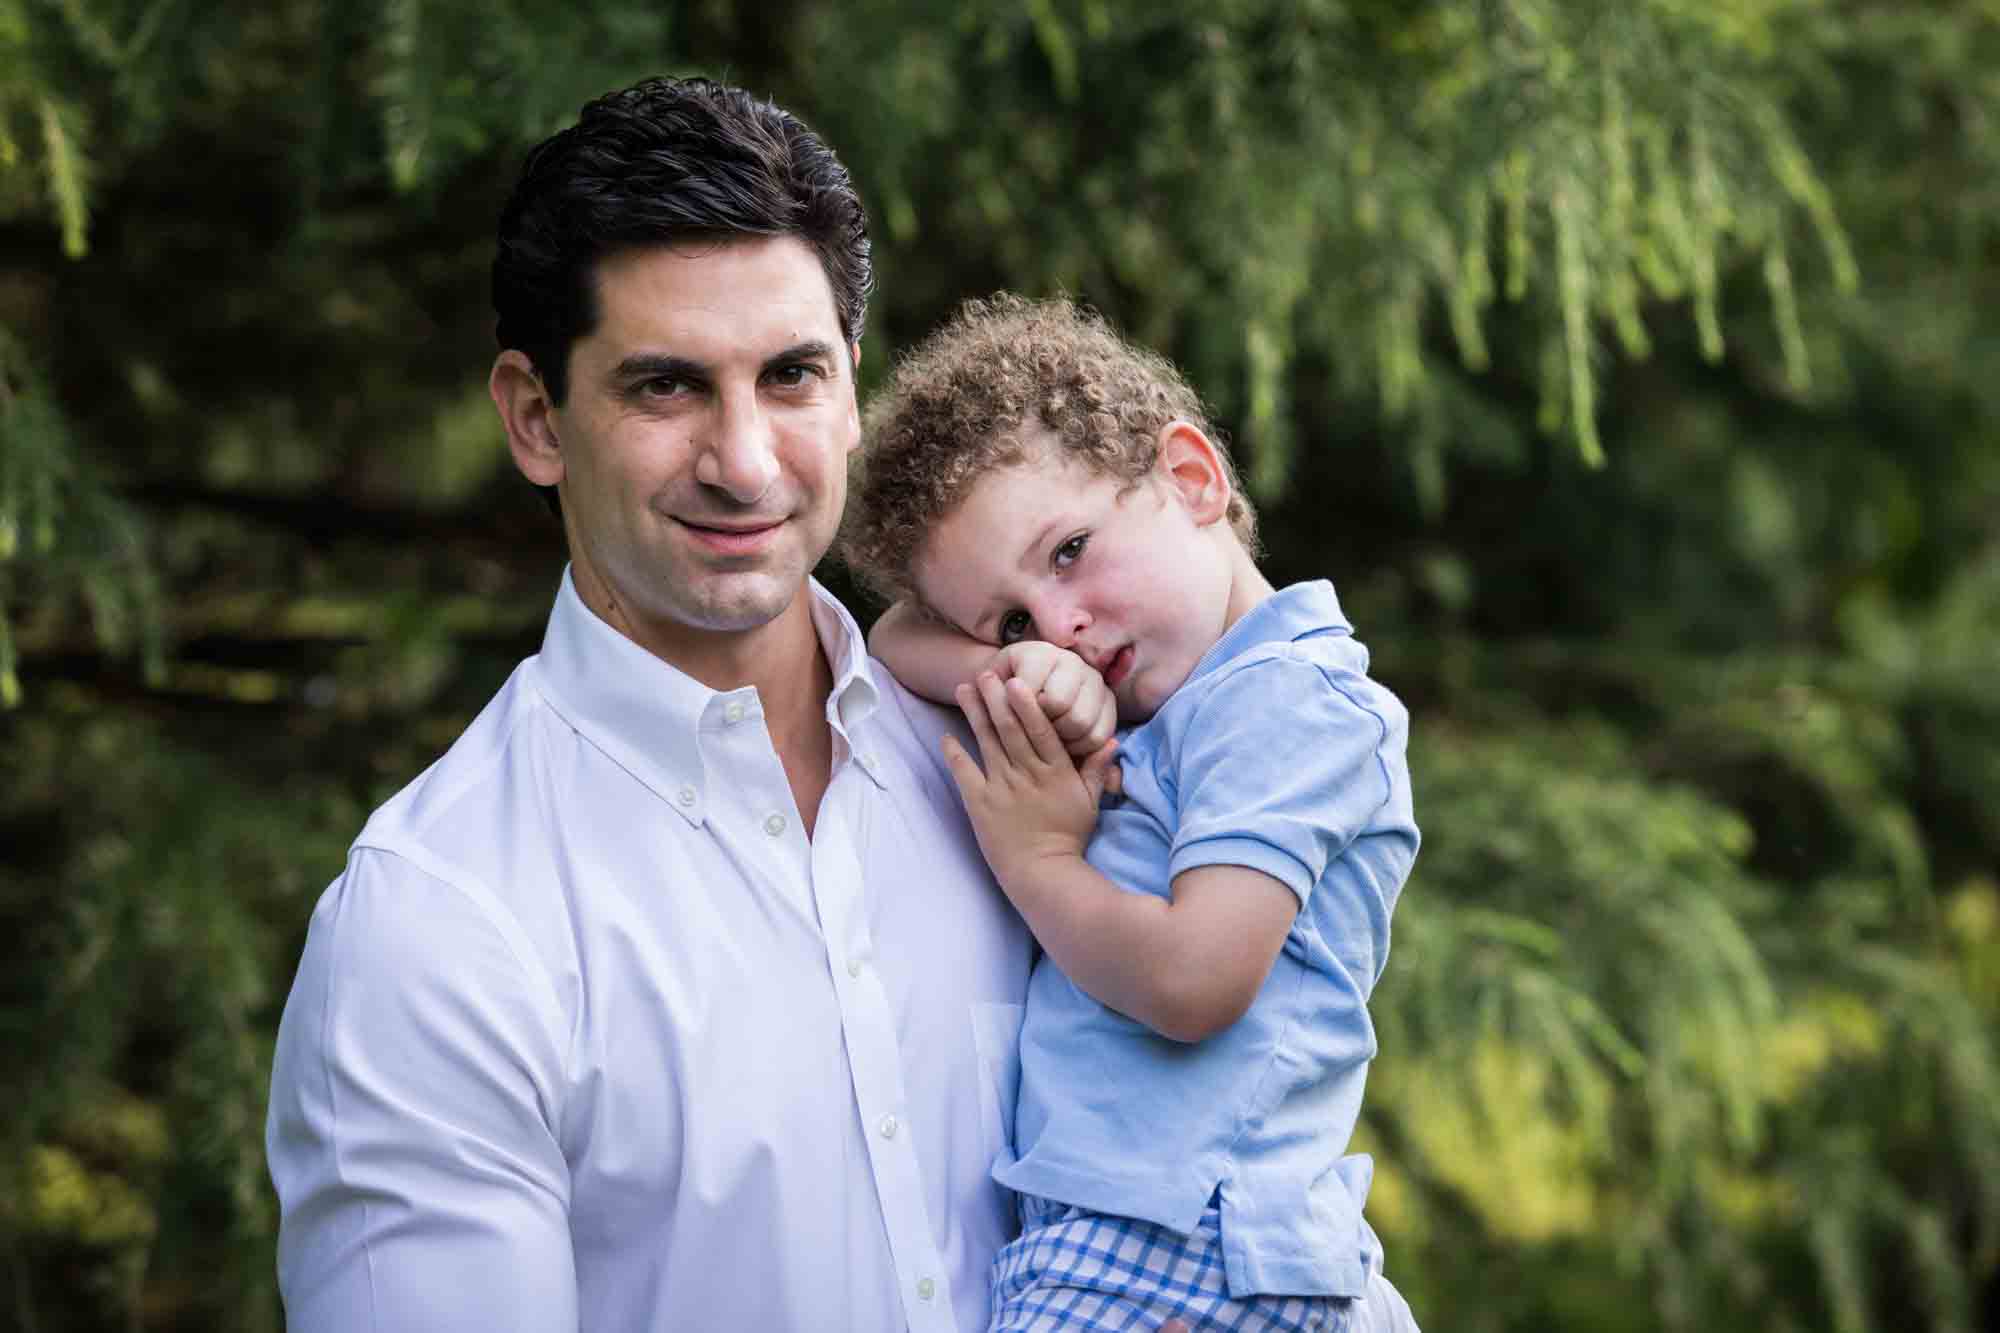 Man with brown hair and white shirt holding little boy with curly hair in front of a tree during a Narrows Botanical Gardens family portrait session